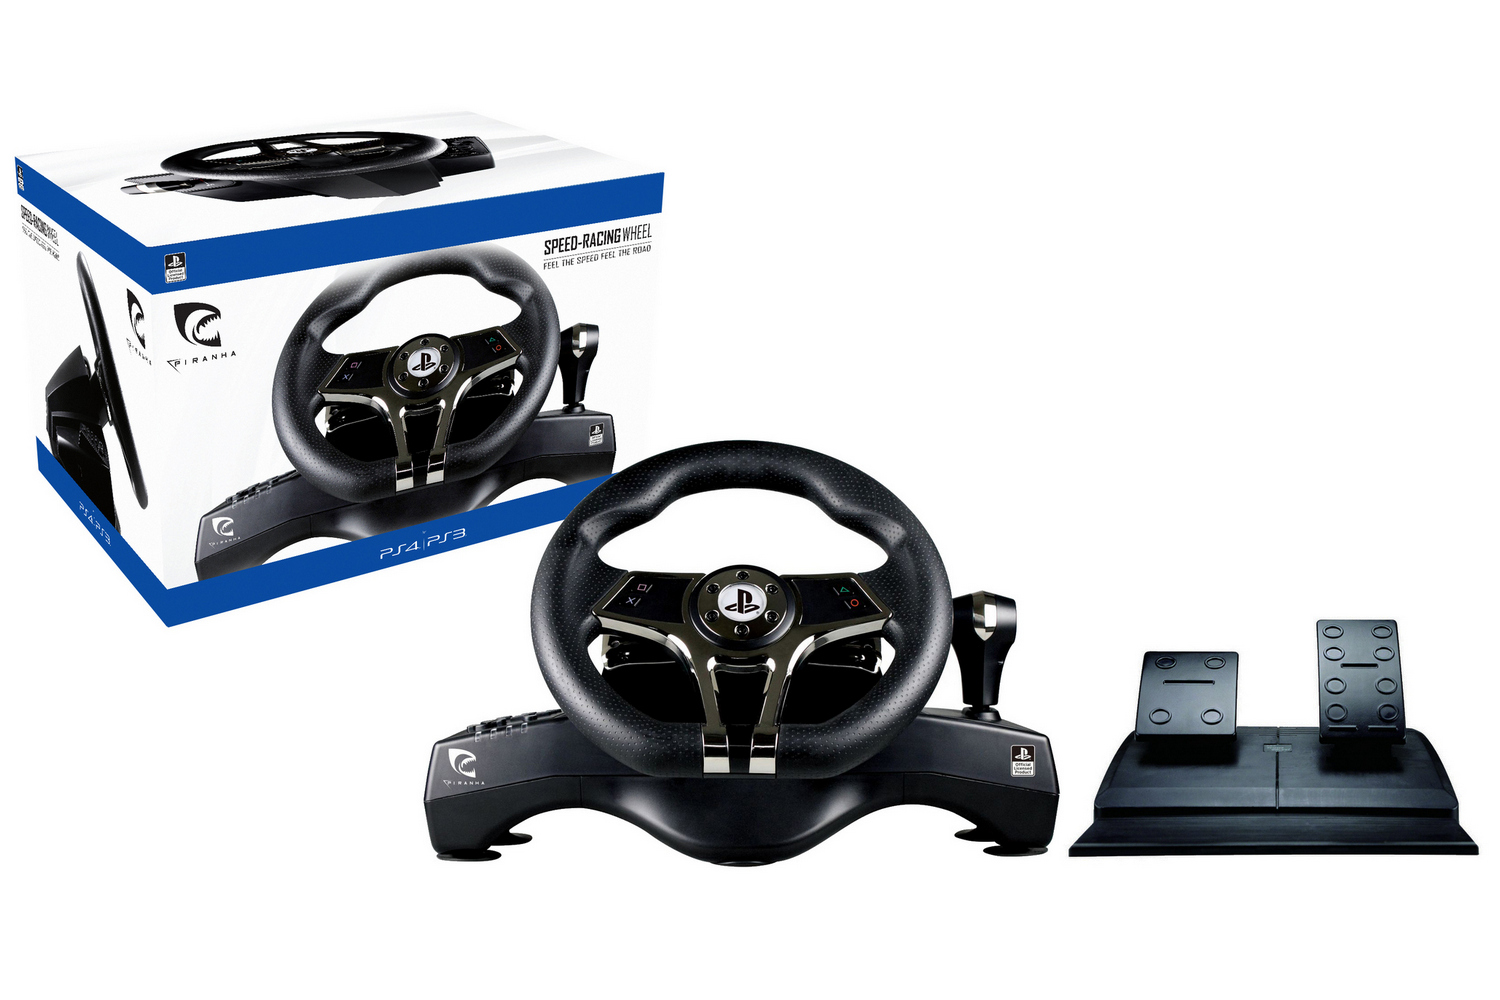 Piranha Speed-Racing Wheel incl. Pedals and Gear Shift (PS4, PS3, PC)